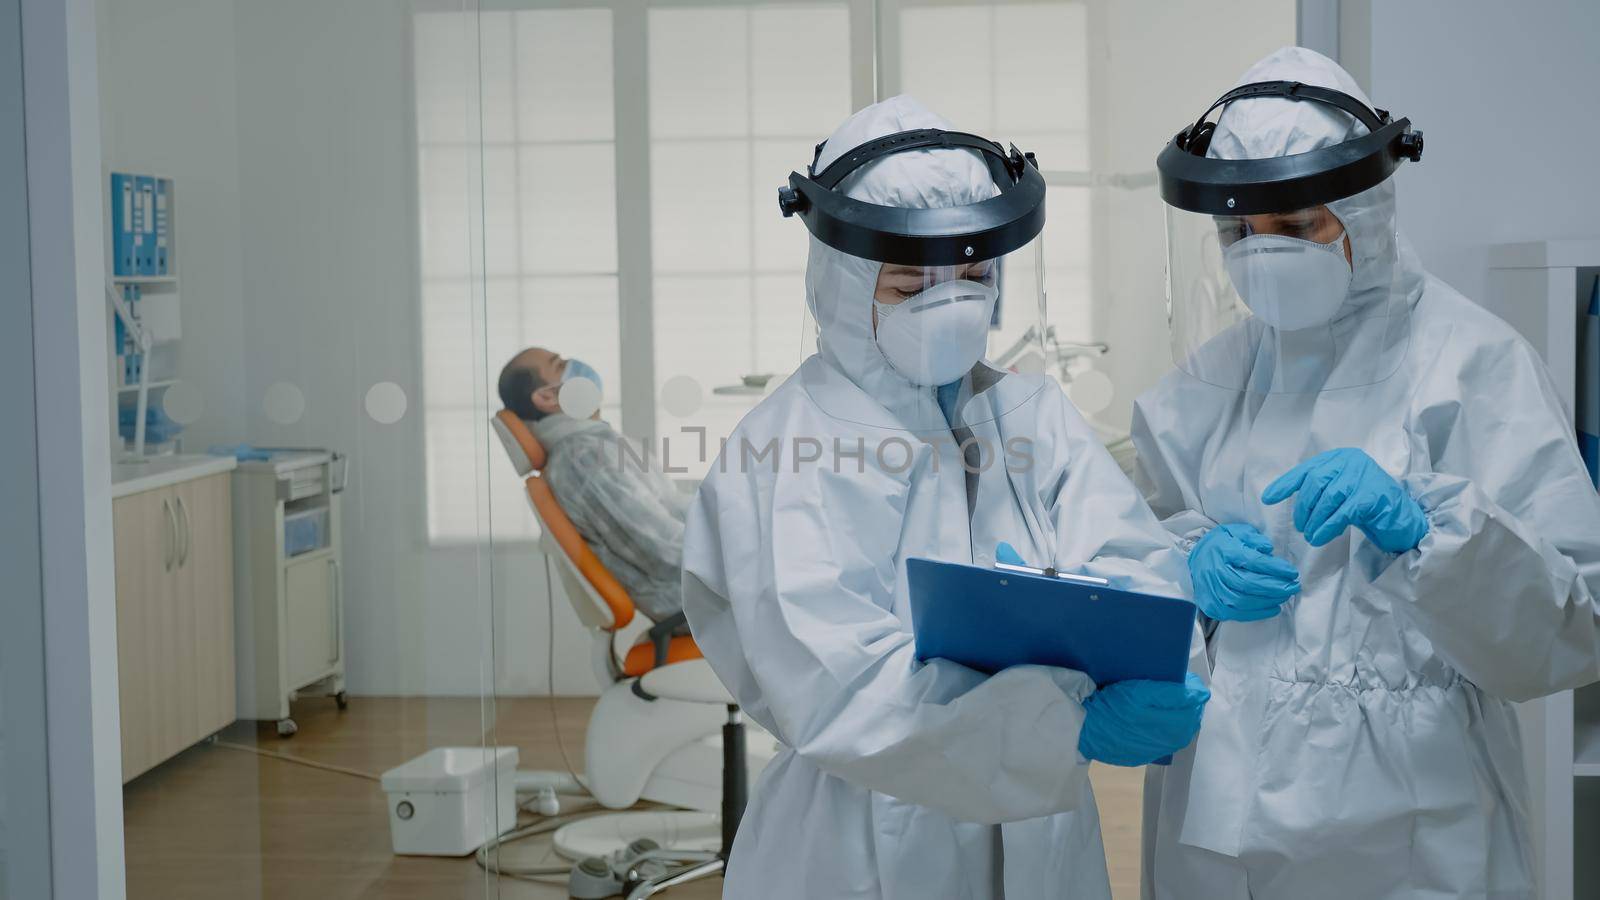 Professional stomatologists wearing ppe suits at oral clinic discussing dental operation for patient sitting in cabinet. Dentists preparing for consultation during coronavirus pandemic